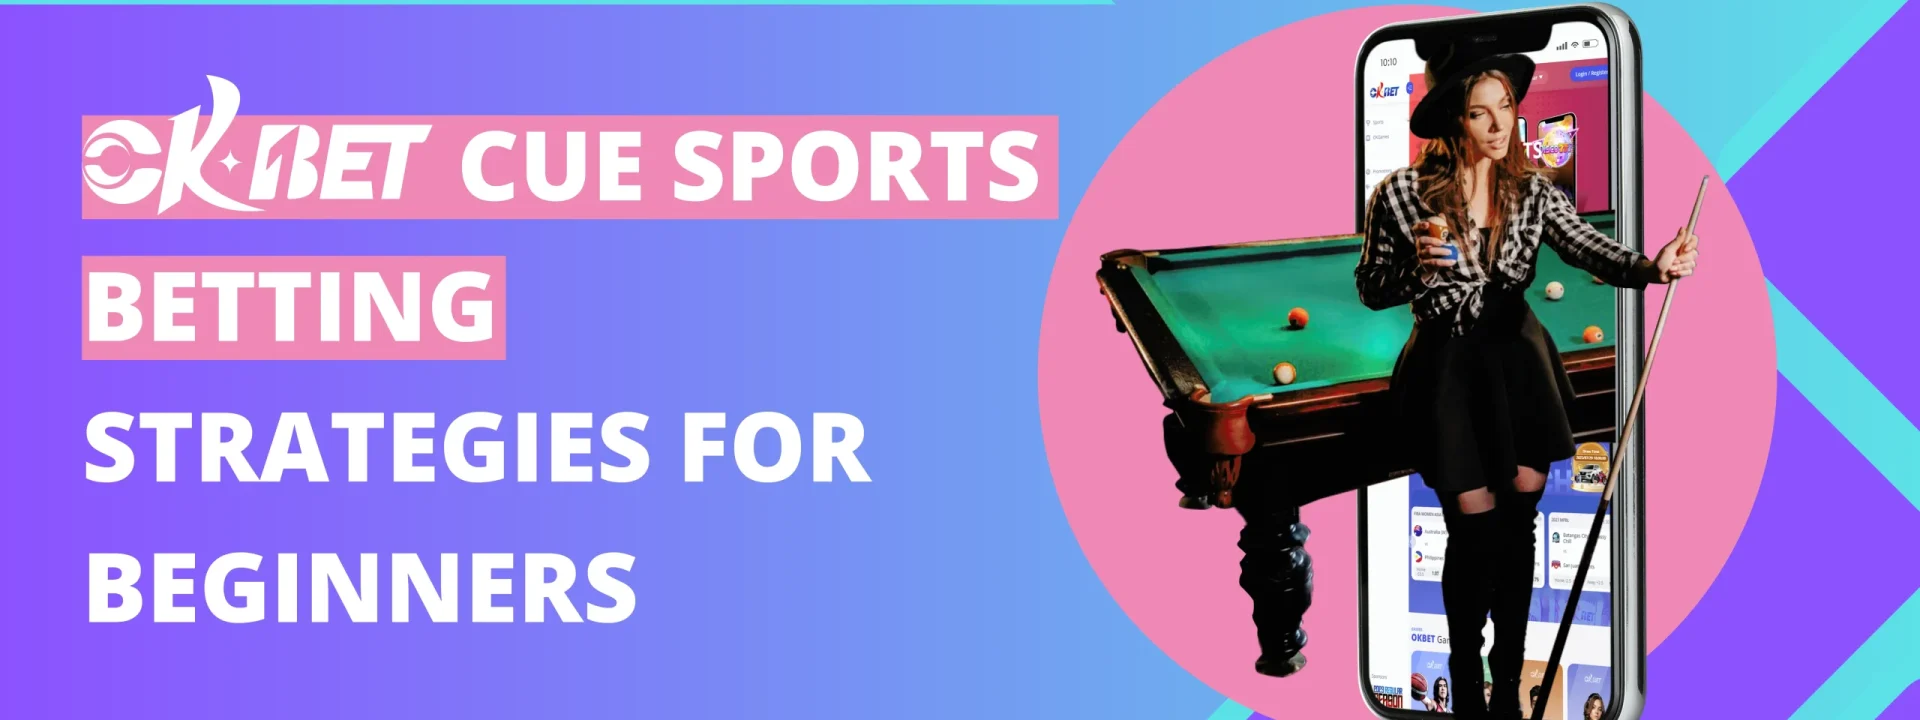 Discover beginner-friendly cue sports betting strategies with OKBet. Elevate your game and boost your wins. Get started today!